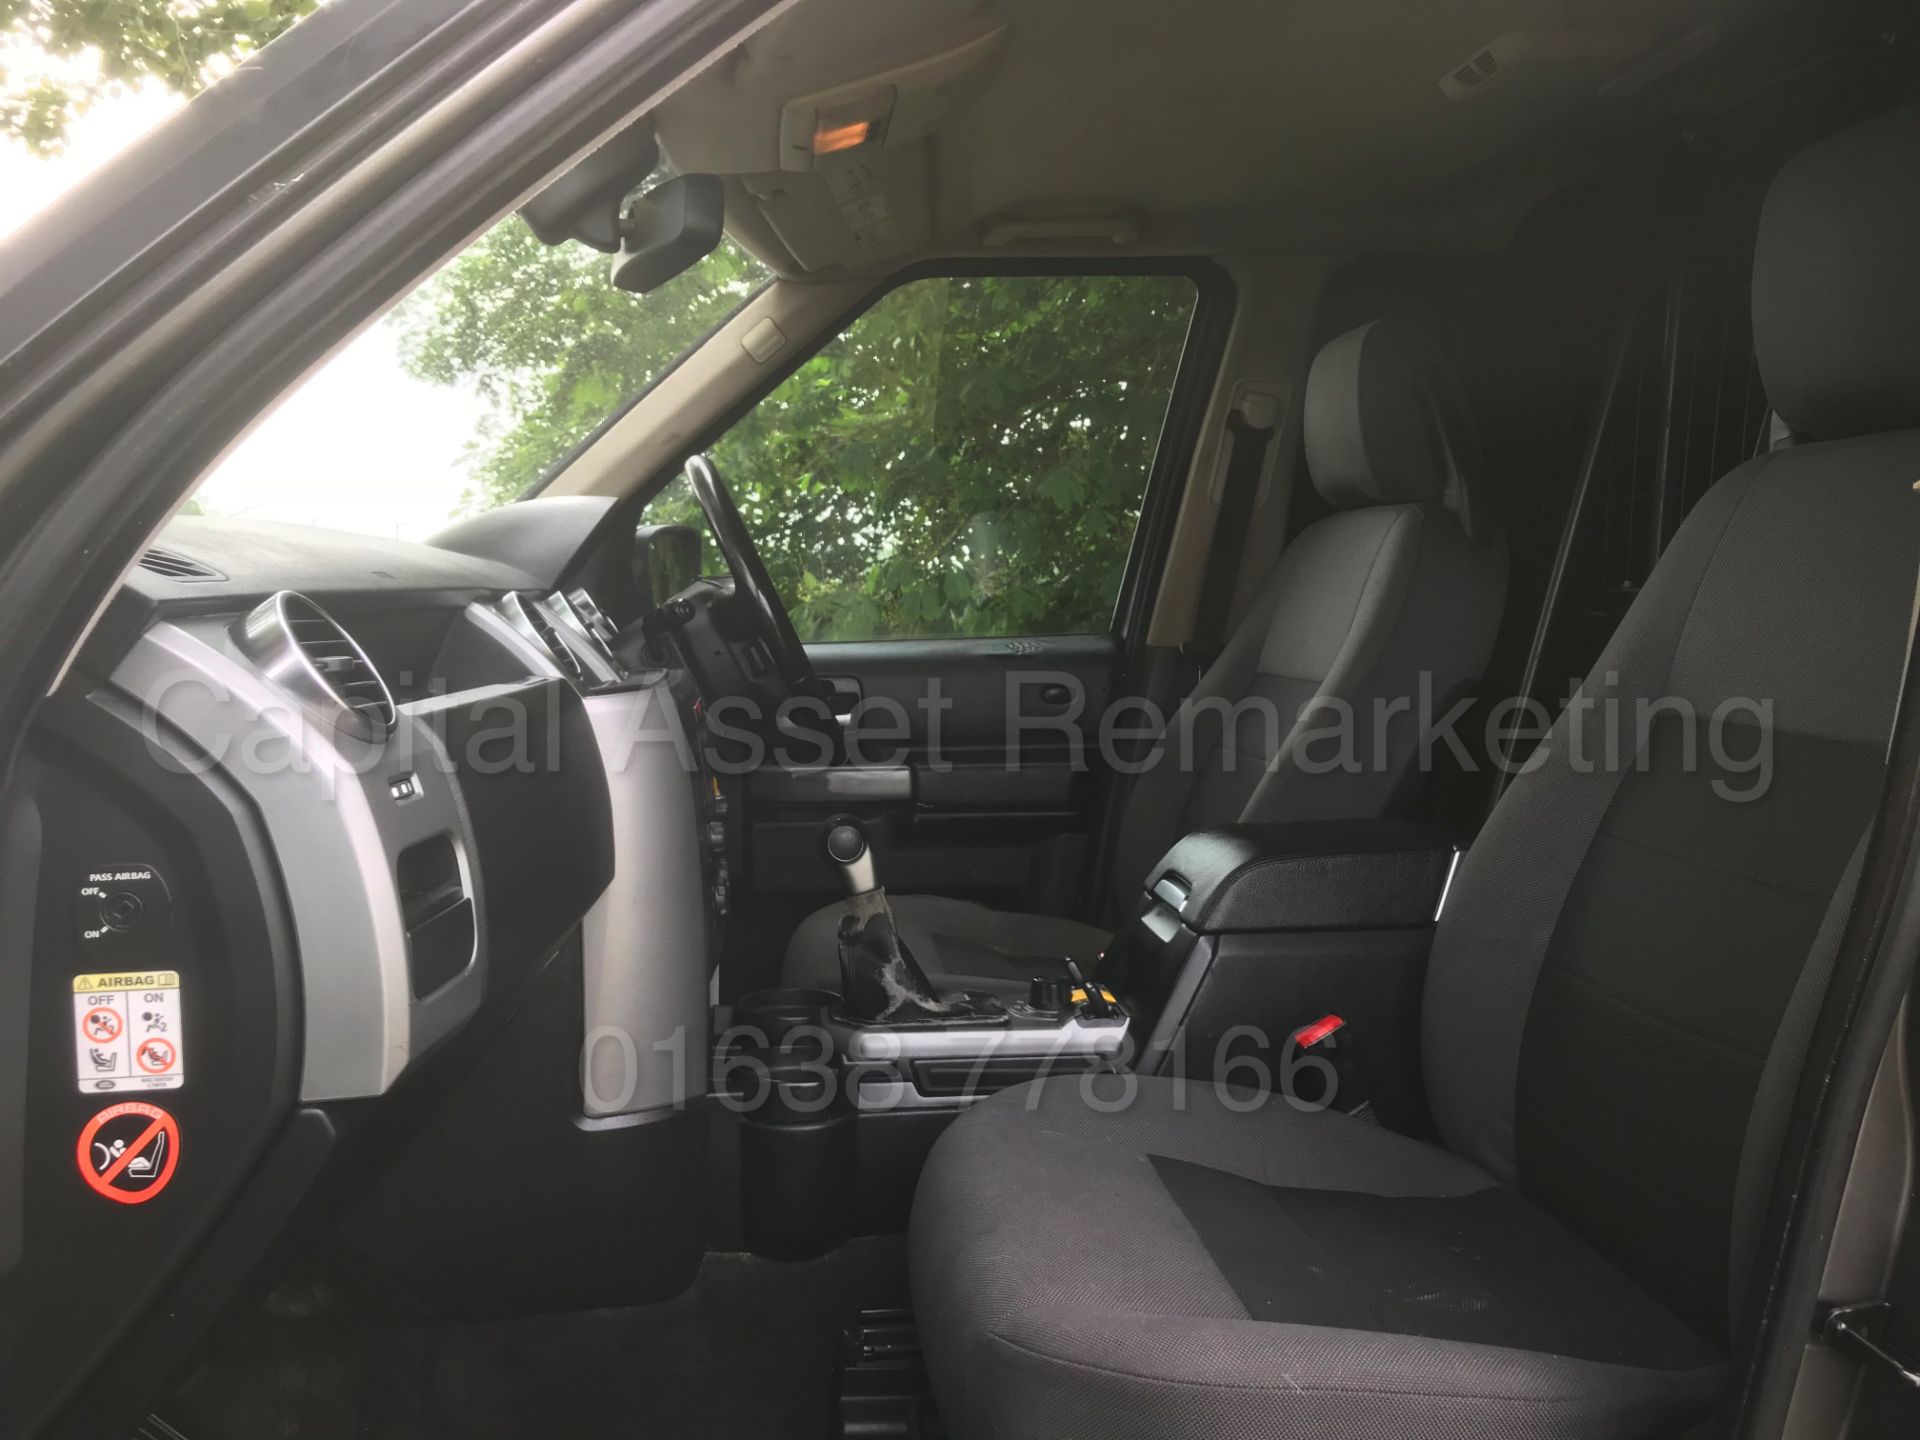 (On Sale) LAND ROVER DISCOVERY 3 'XS EDITION' **COMMERCIAL VAN**(2008 MODEL) 'TDV6-190 BHP' (NO VAT) - Image 16 of 38